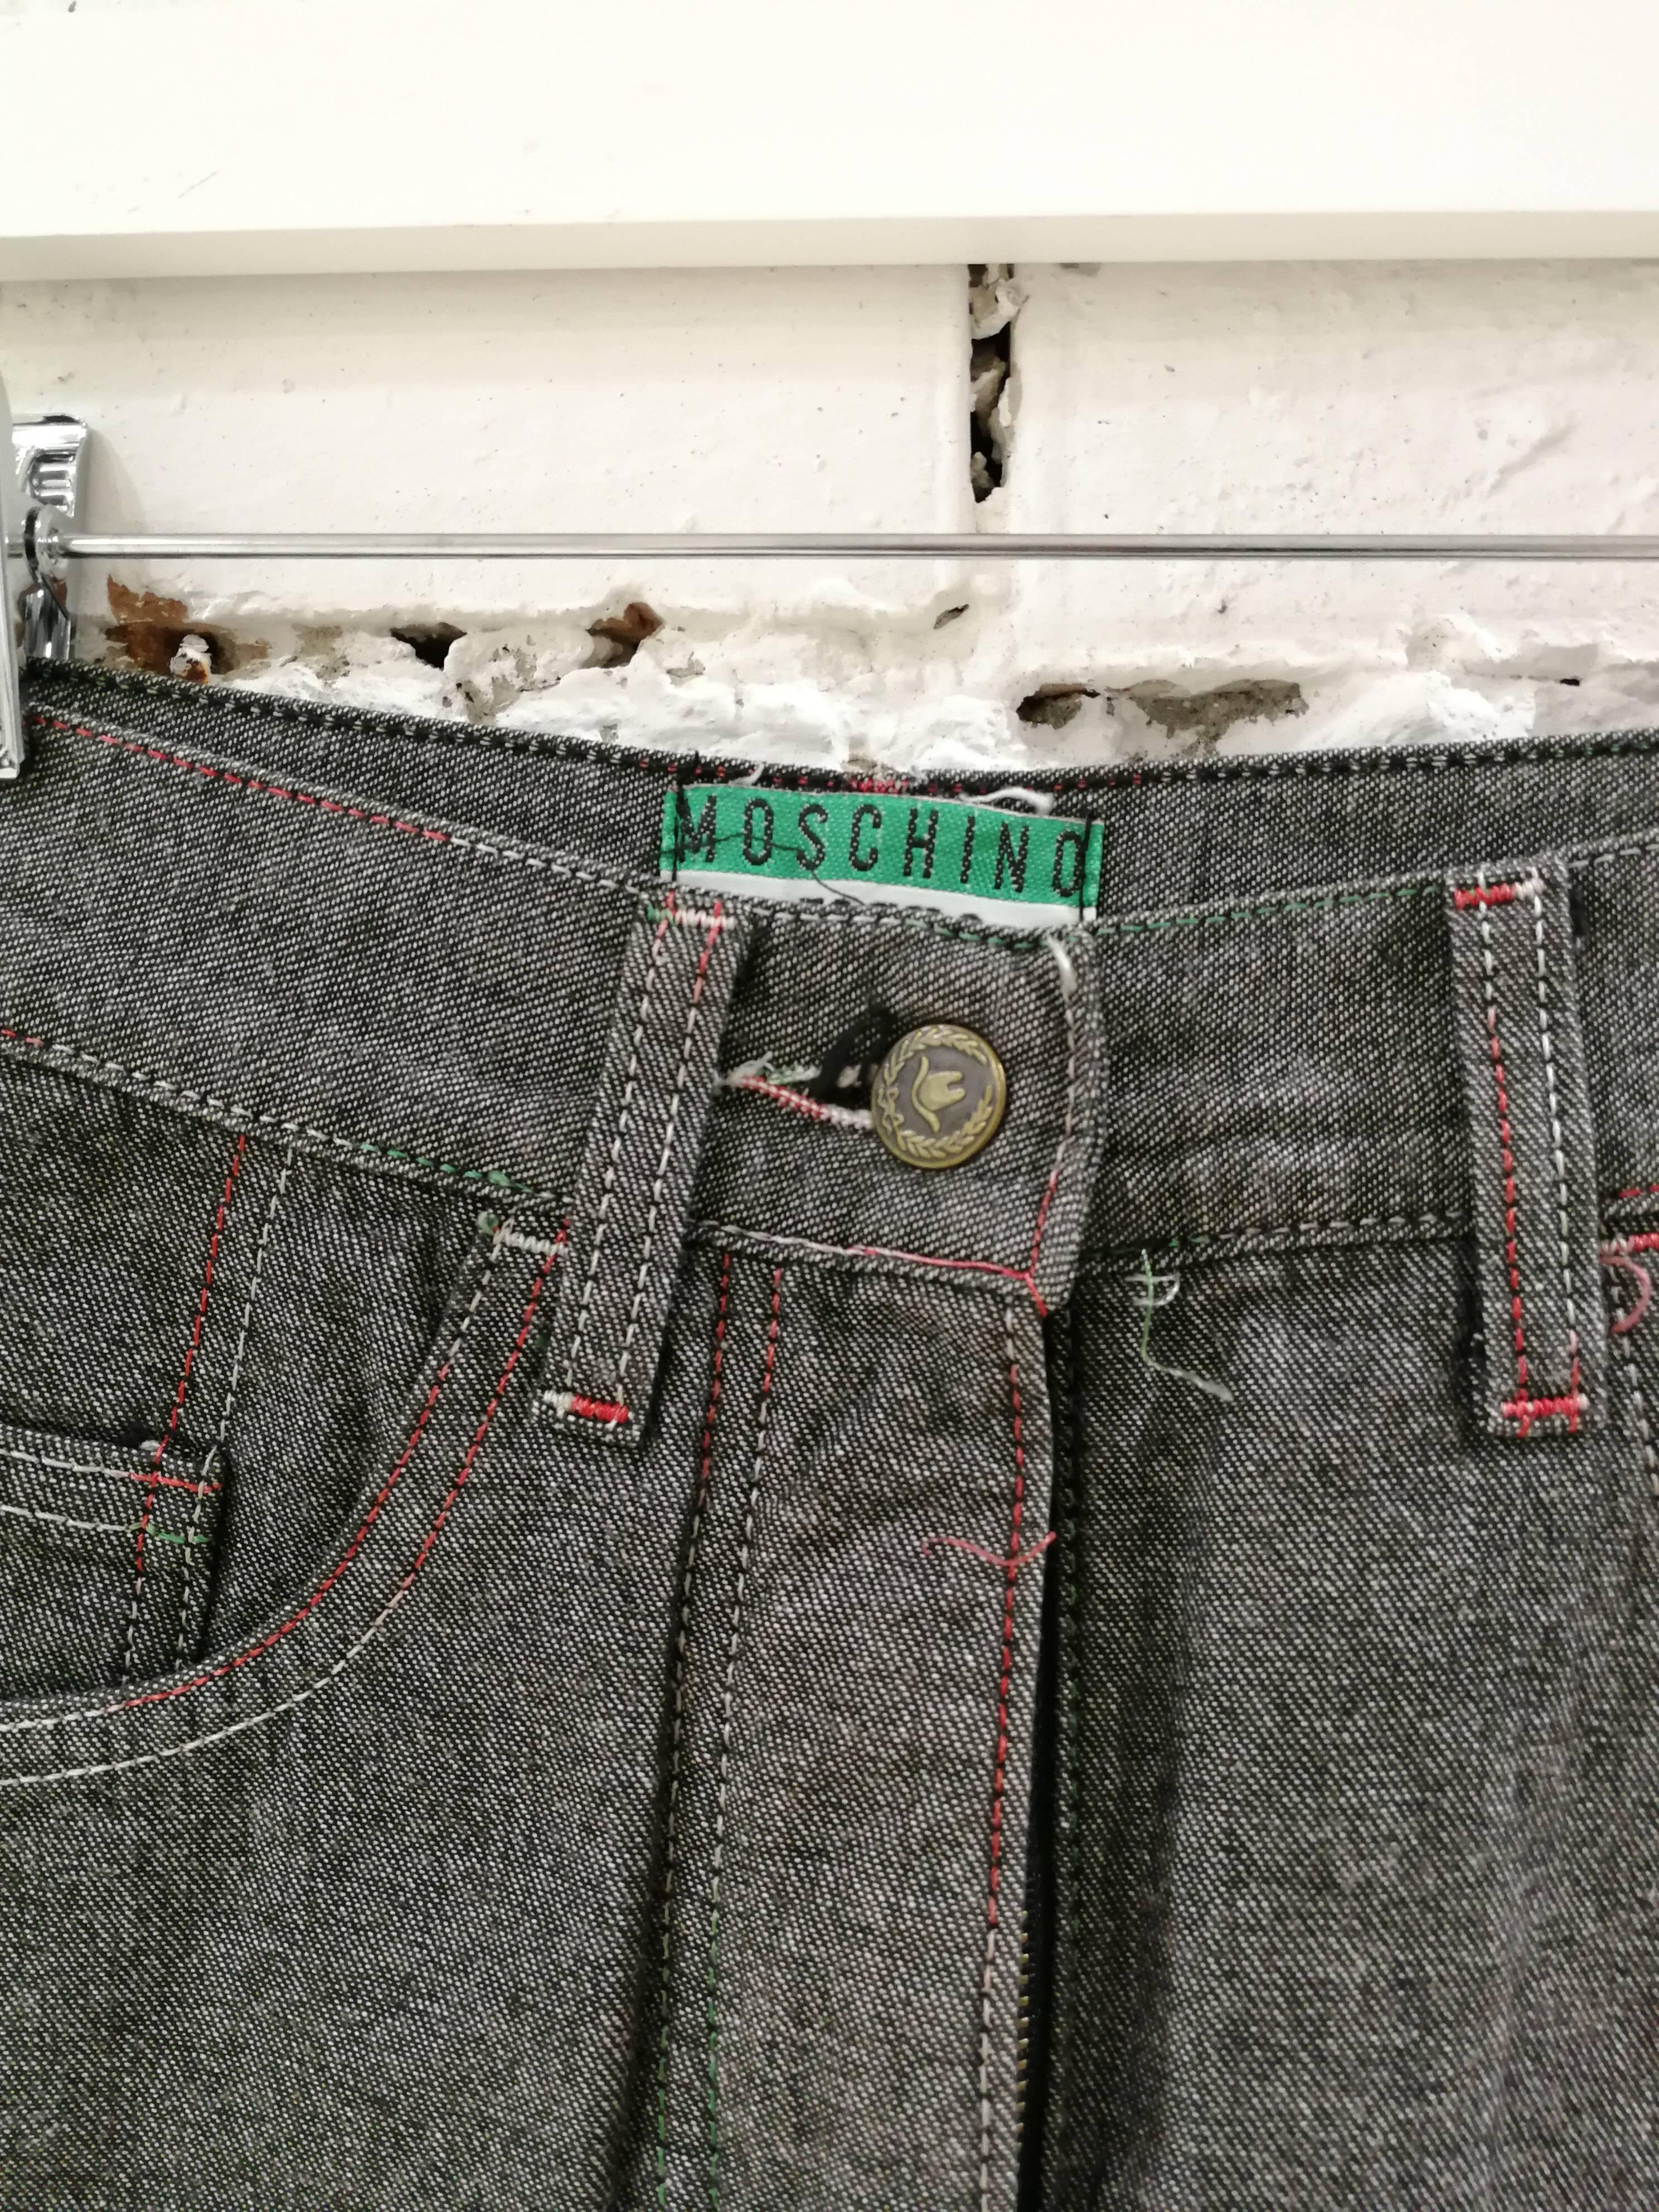 Moschino Jeans Grey Skirt

Totally made in italy in size 40